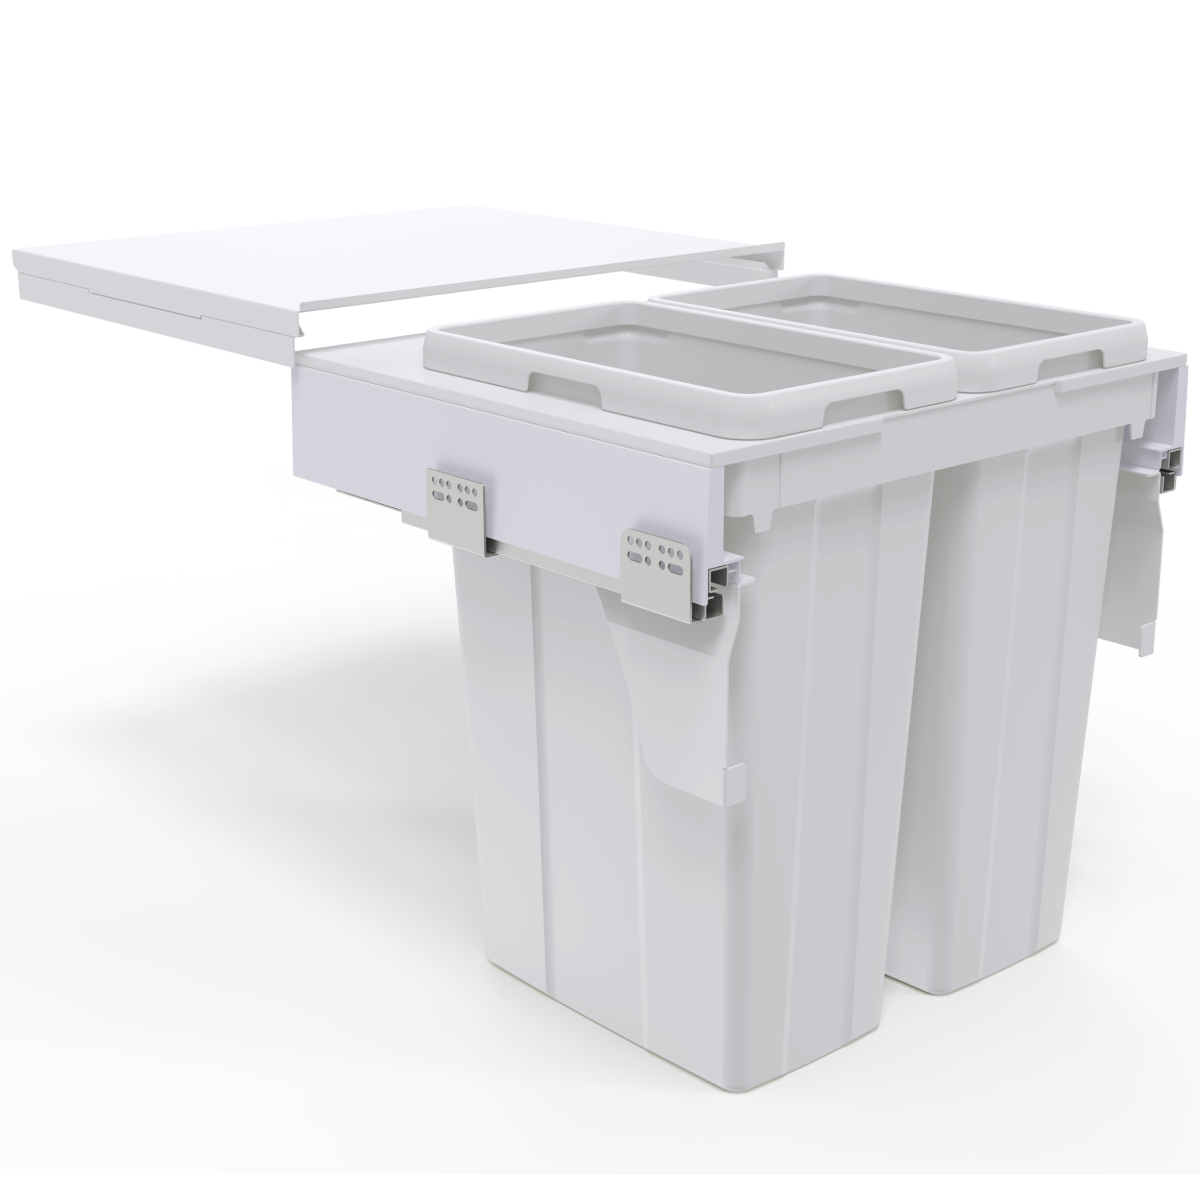 BIN & FRAME SET to suit 600mm cabinet width - no runners 2 x 35 ltr buckets and side by side frame